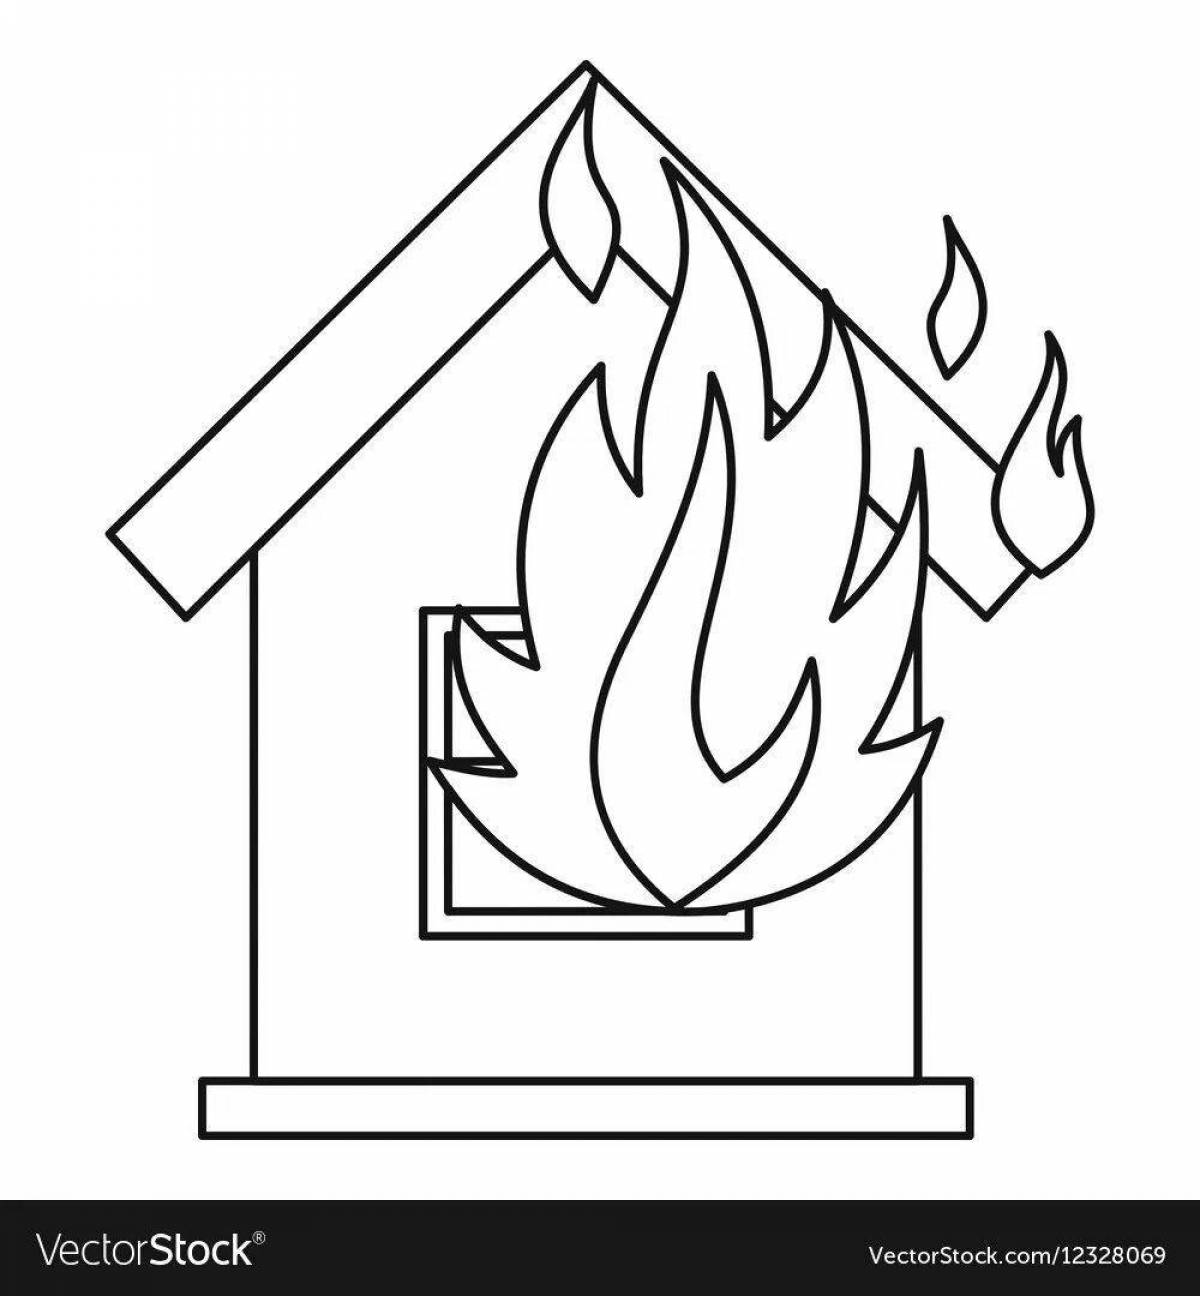 Unforgettable burning house coloring book for kids